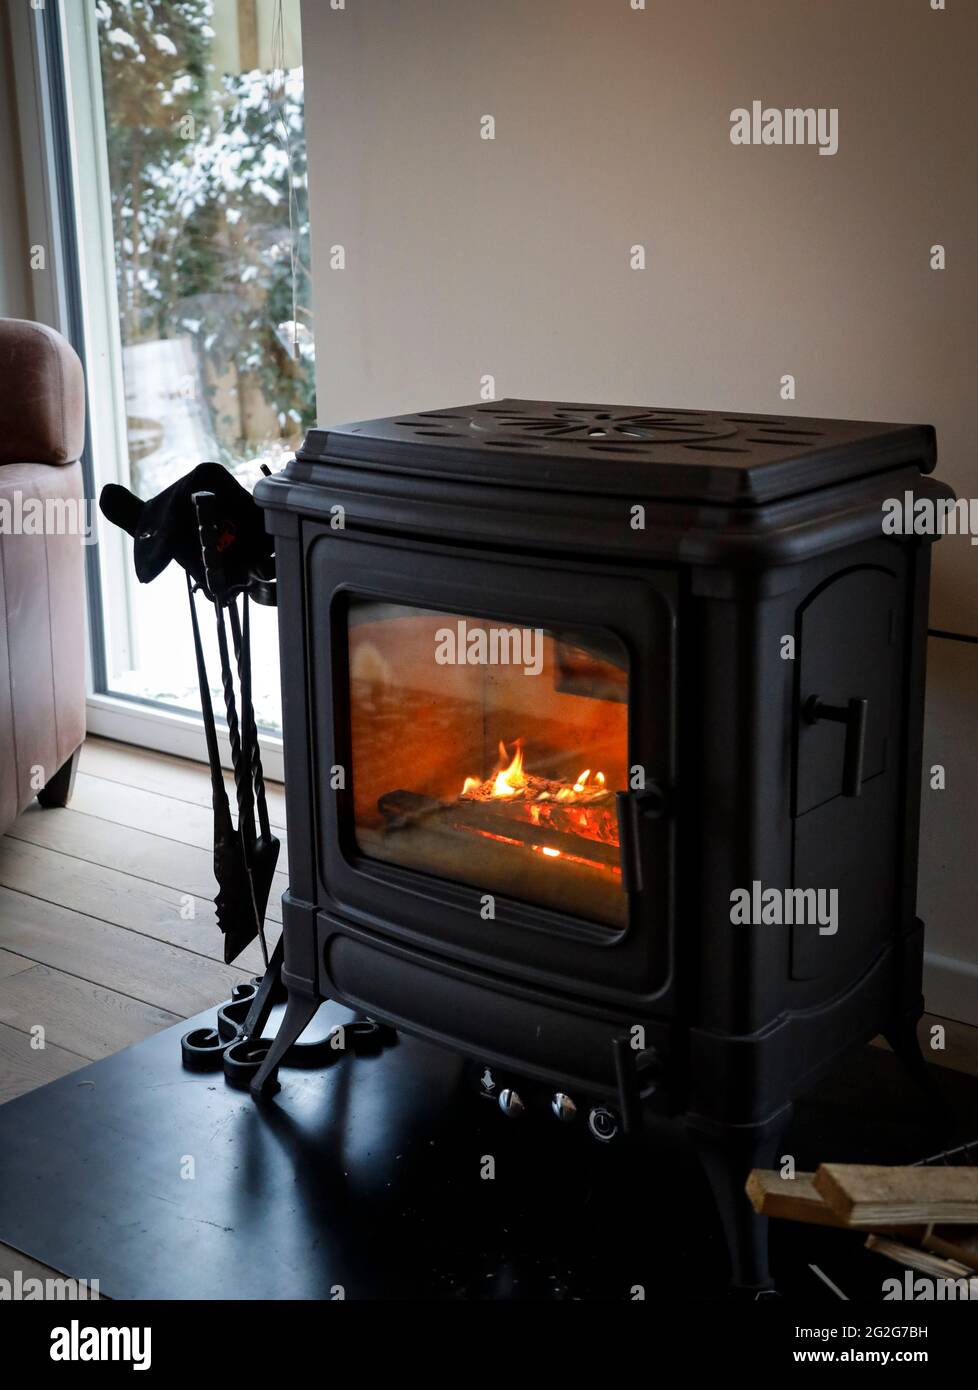 Old fashion look fireplace stove Stock Photo